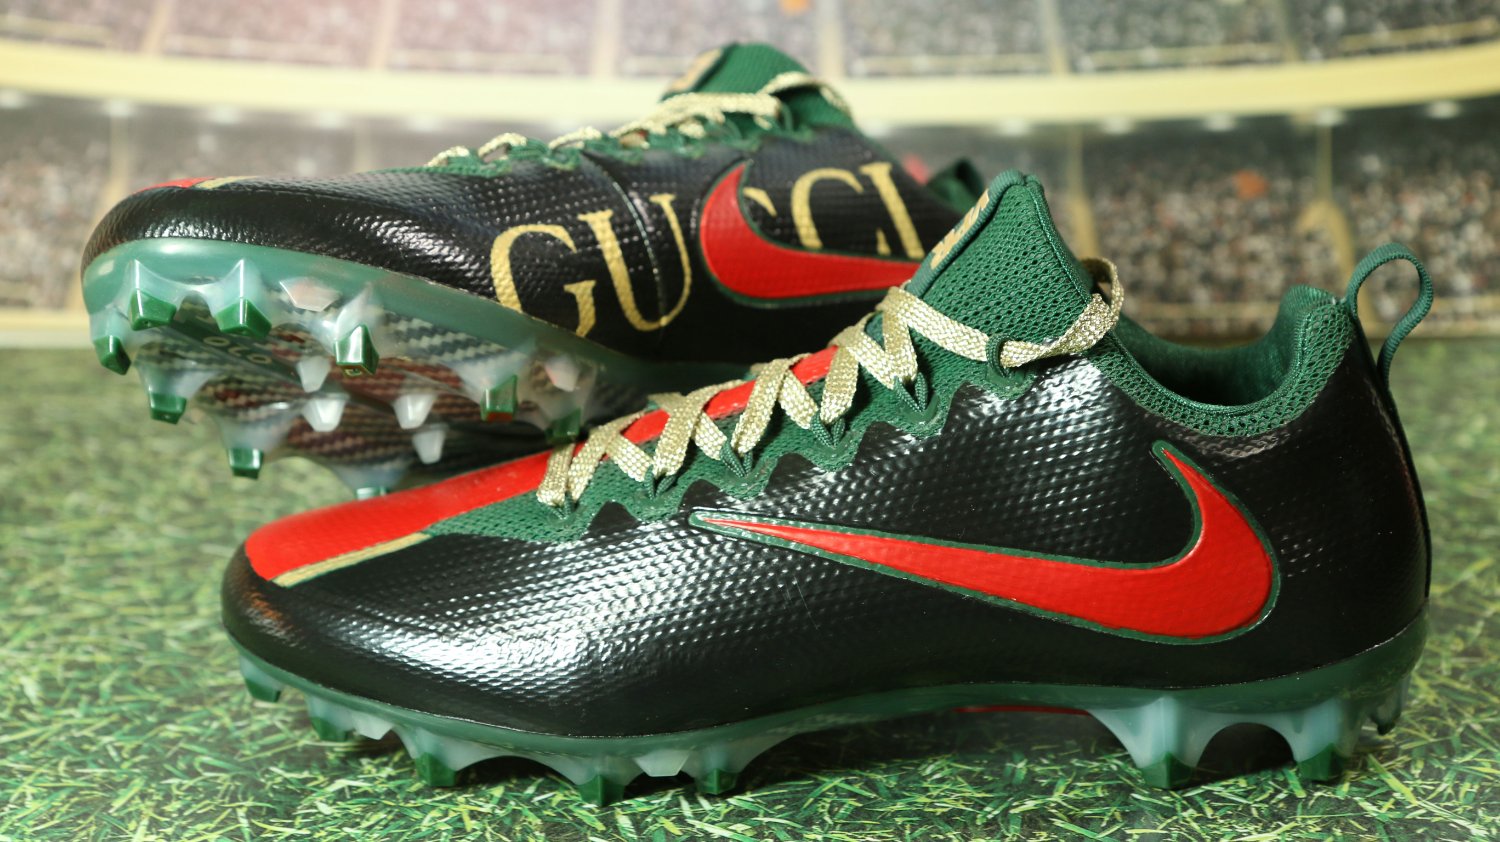 gucci cleats soccer